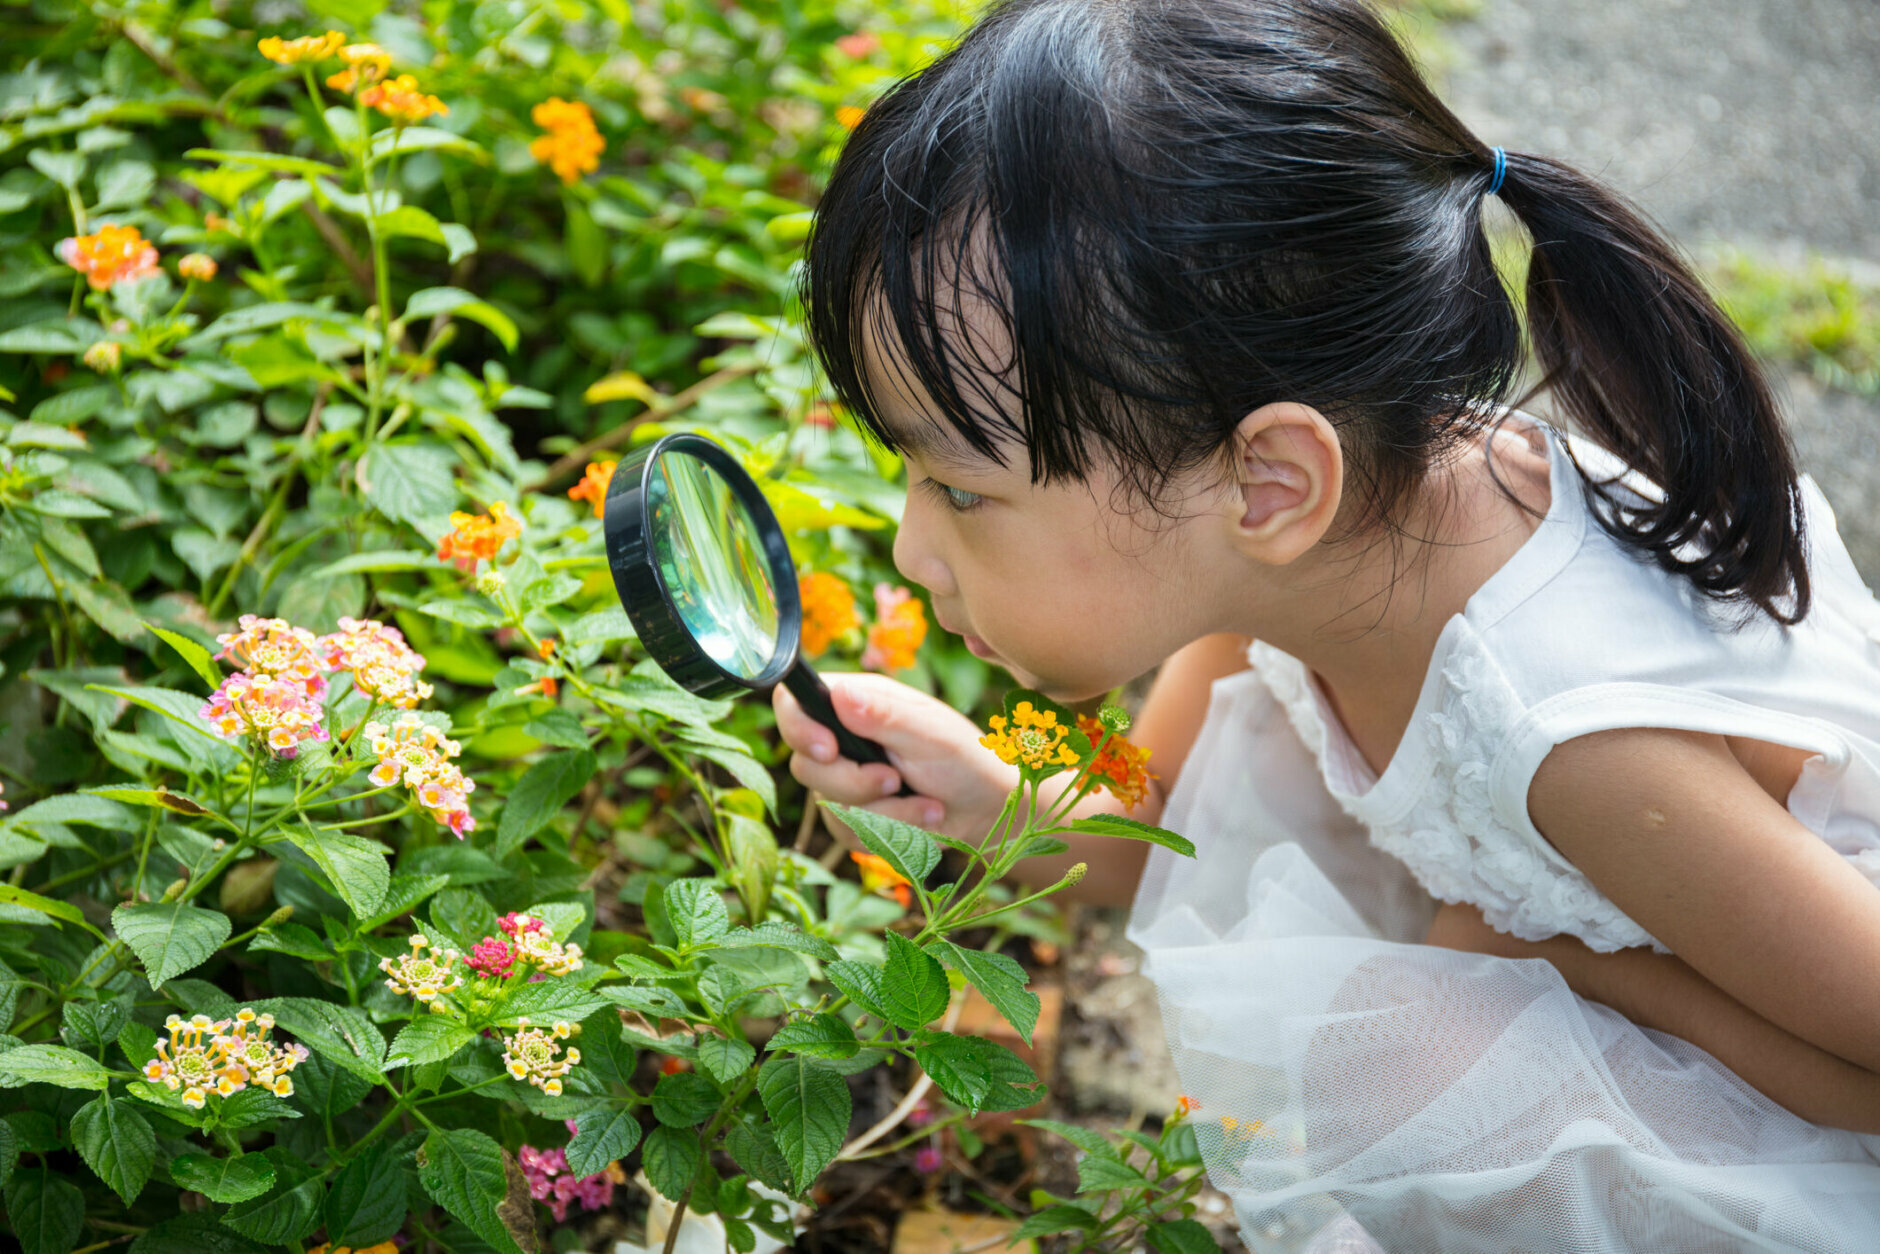 Asian Chinese little girl looking at flower through a magnifying glass in outdoor garden